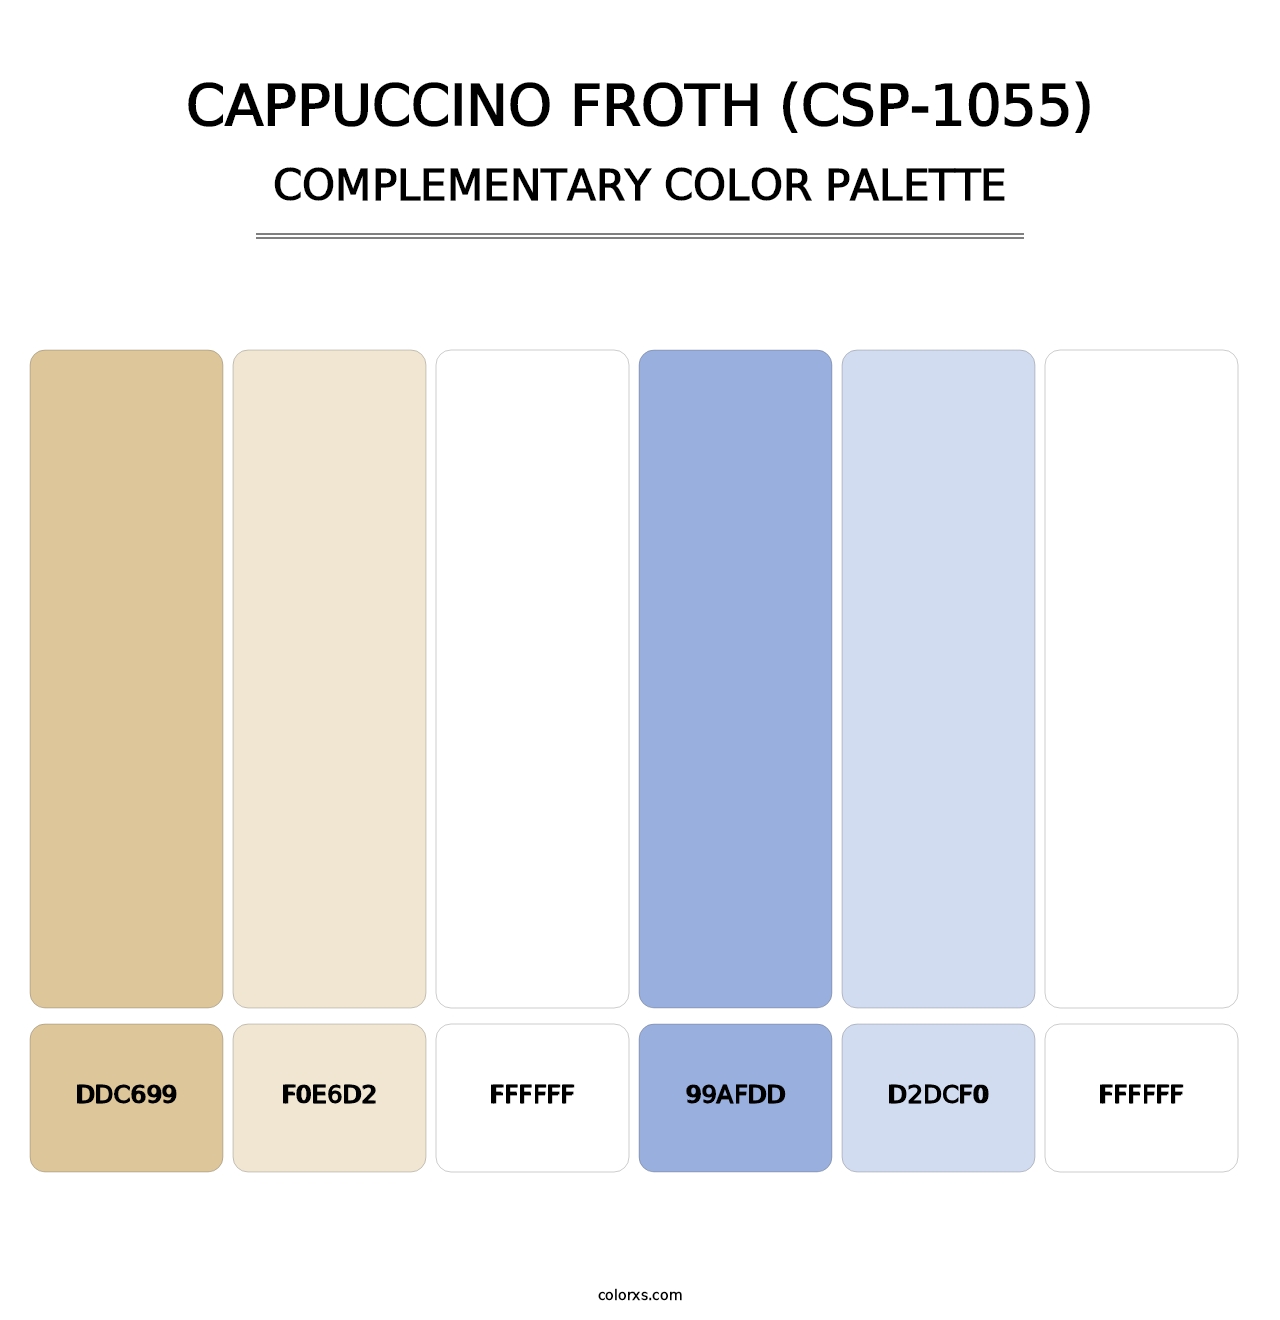 Cappuccino Froth (CSP-1055) - Complementary Color Palette